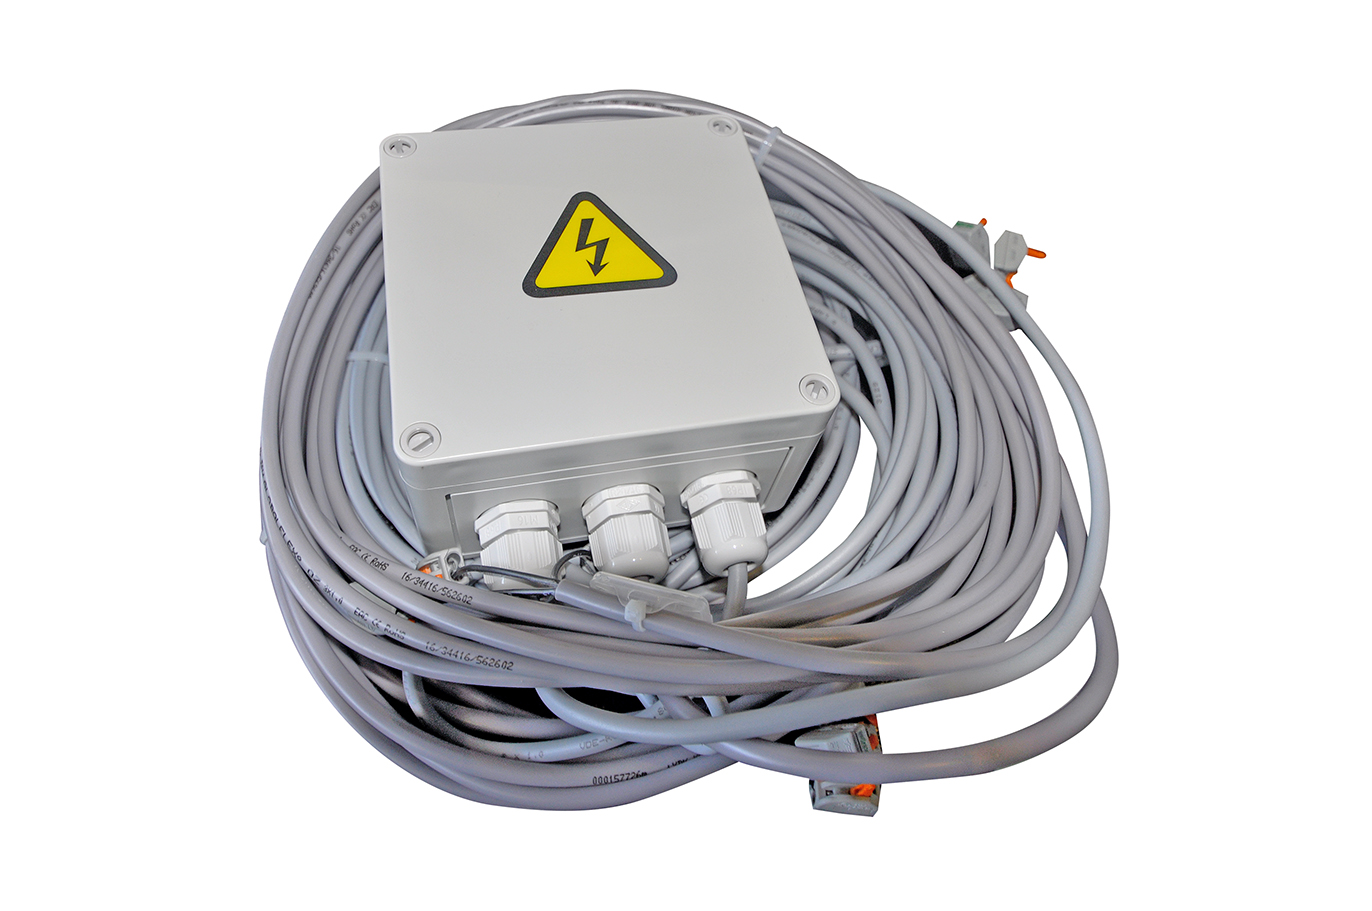 Master slave junction box for controlling a motor